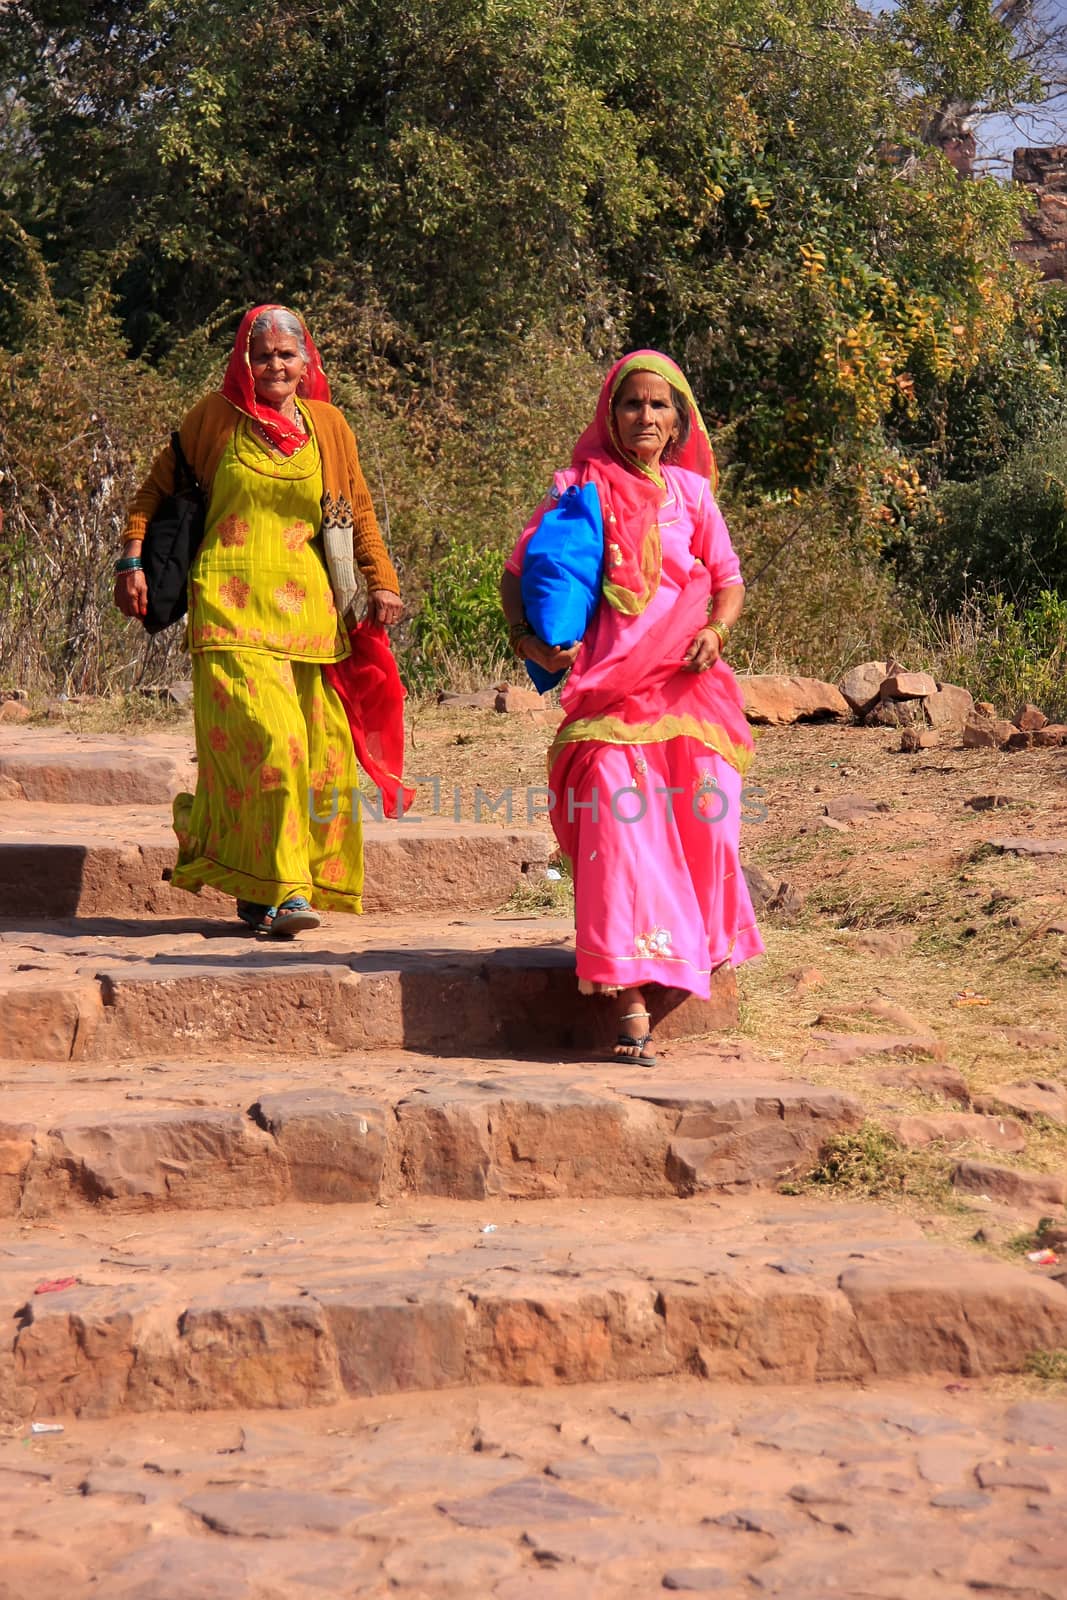 Indian women in colorful saris walking at Ranthambore Fort, Indi by donya_nedomam